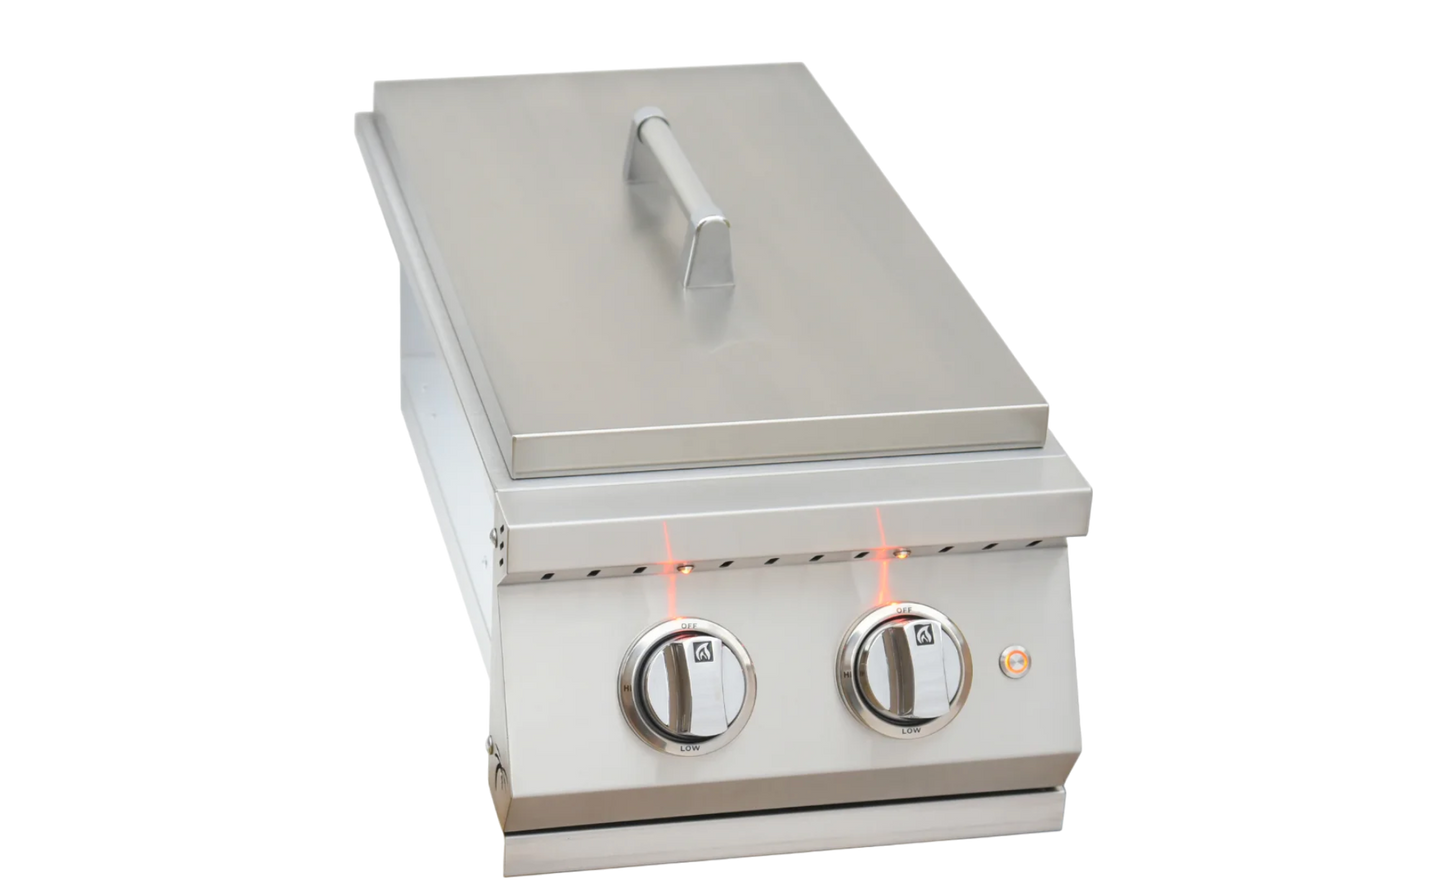 Professional Double Side Burner with removable cover